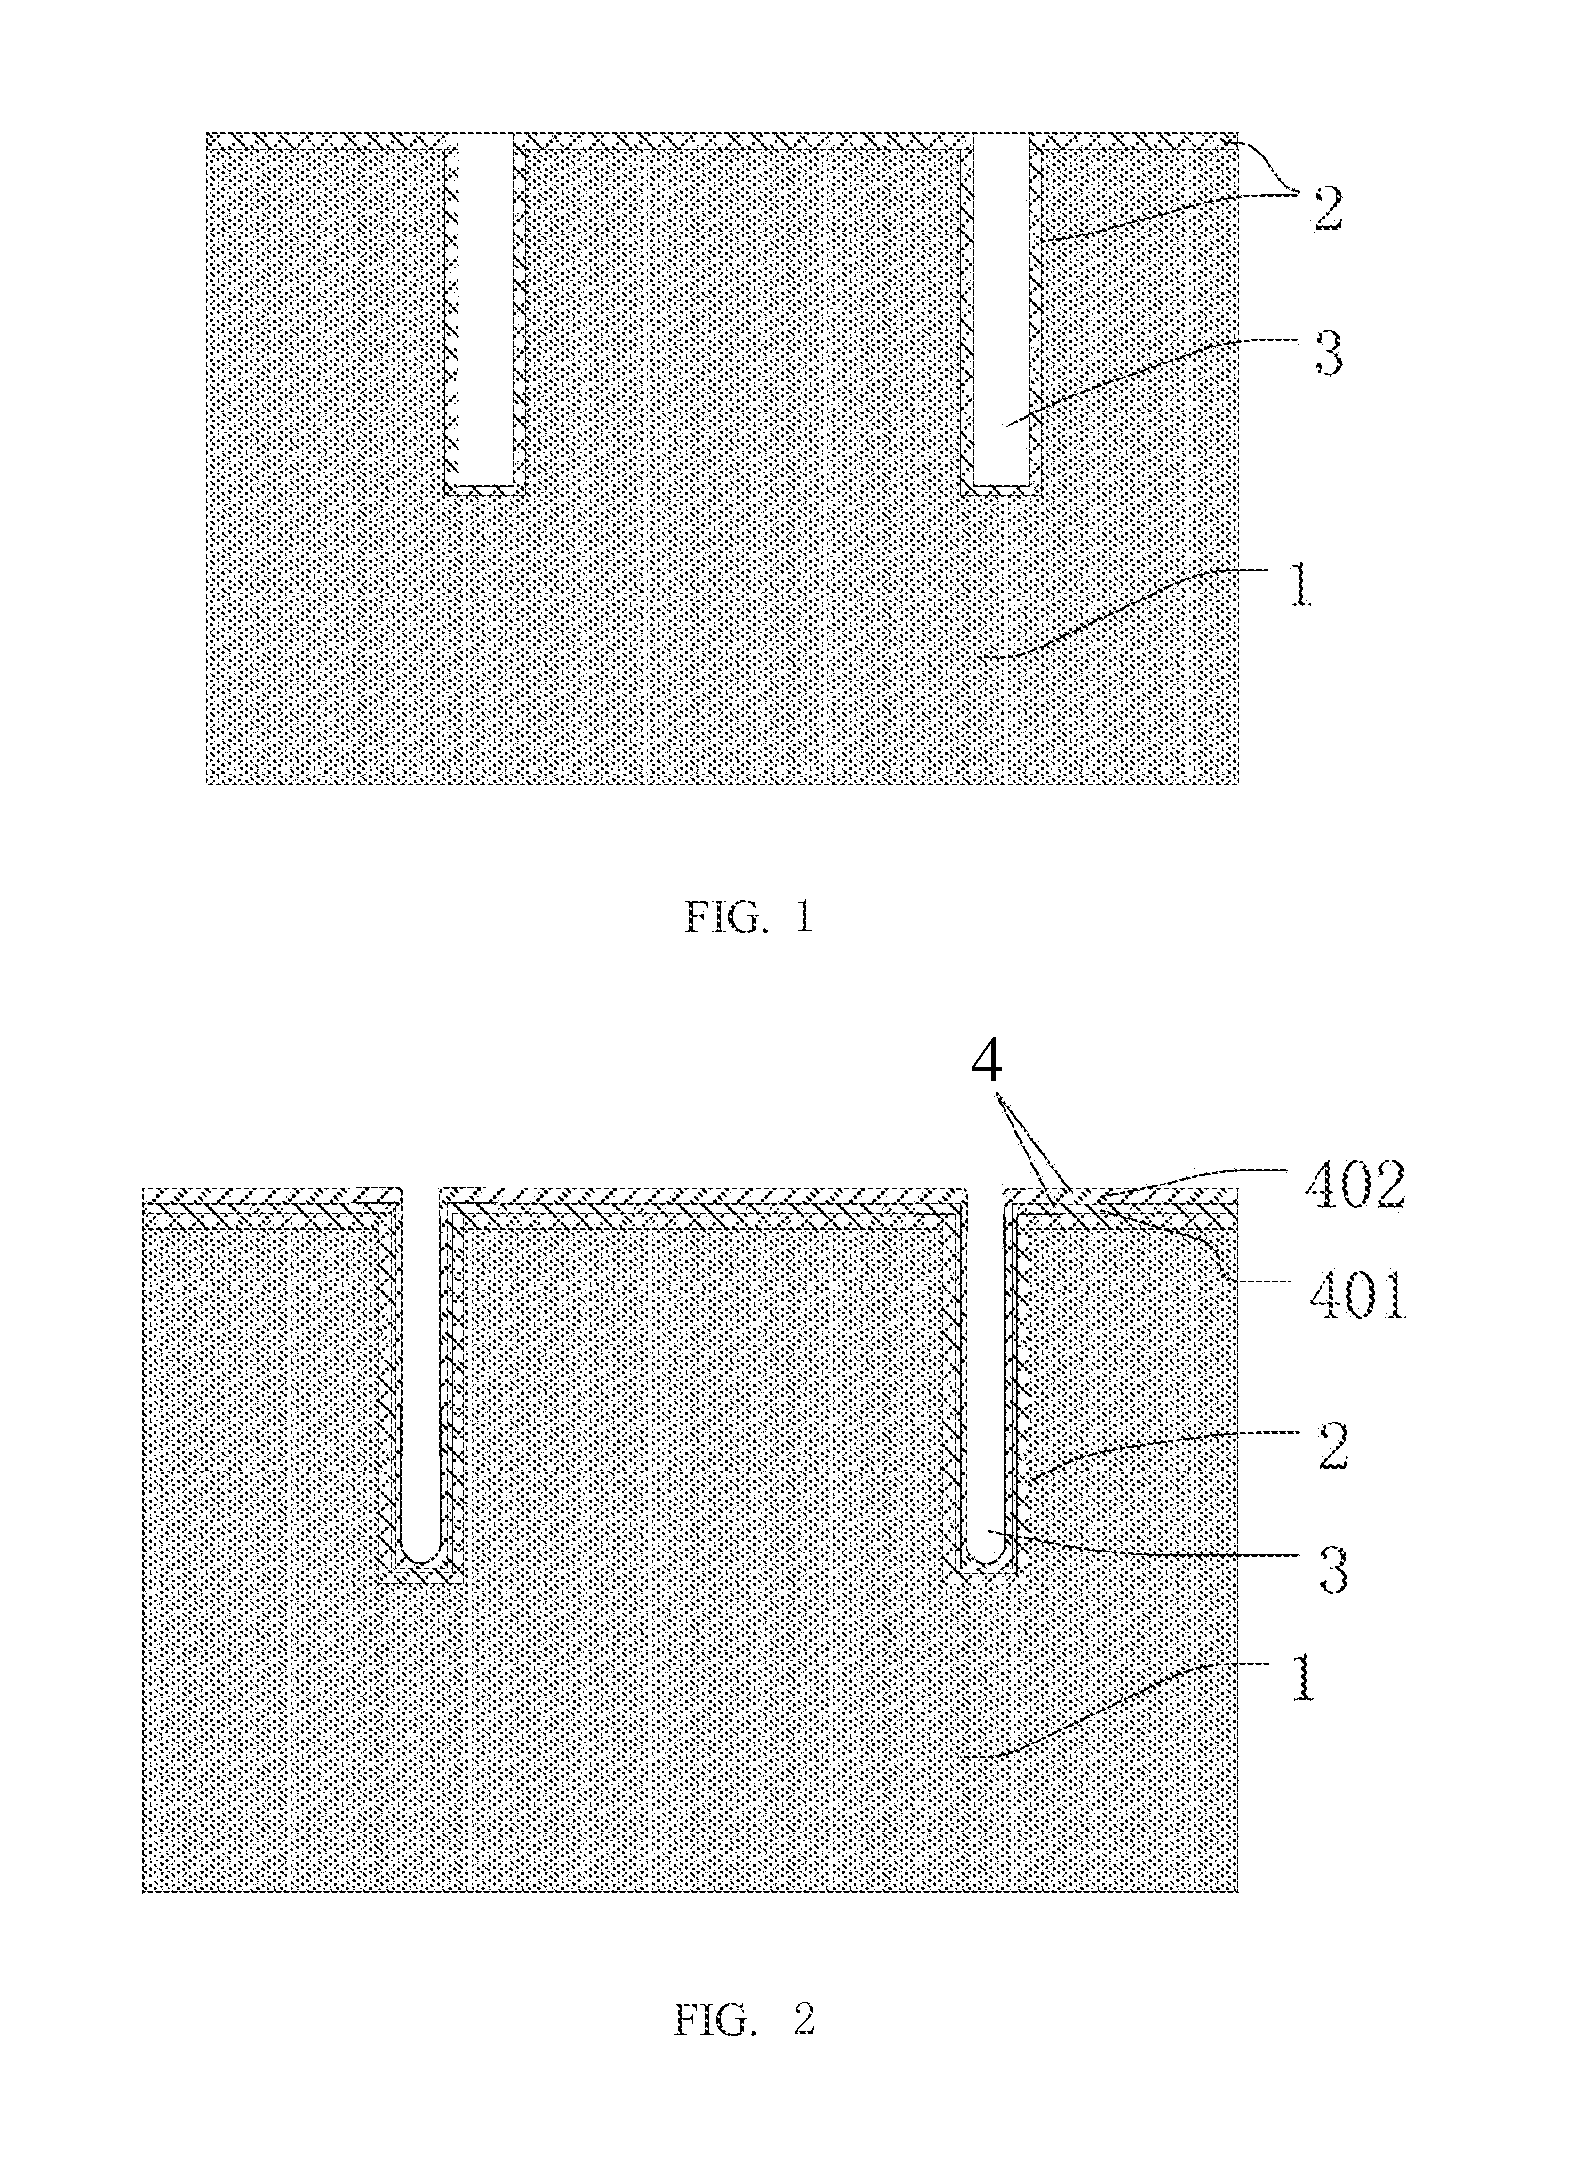 Method for removing electroplated metal facets and reusing a barrier layer without chemical mechanical polishing